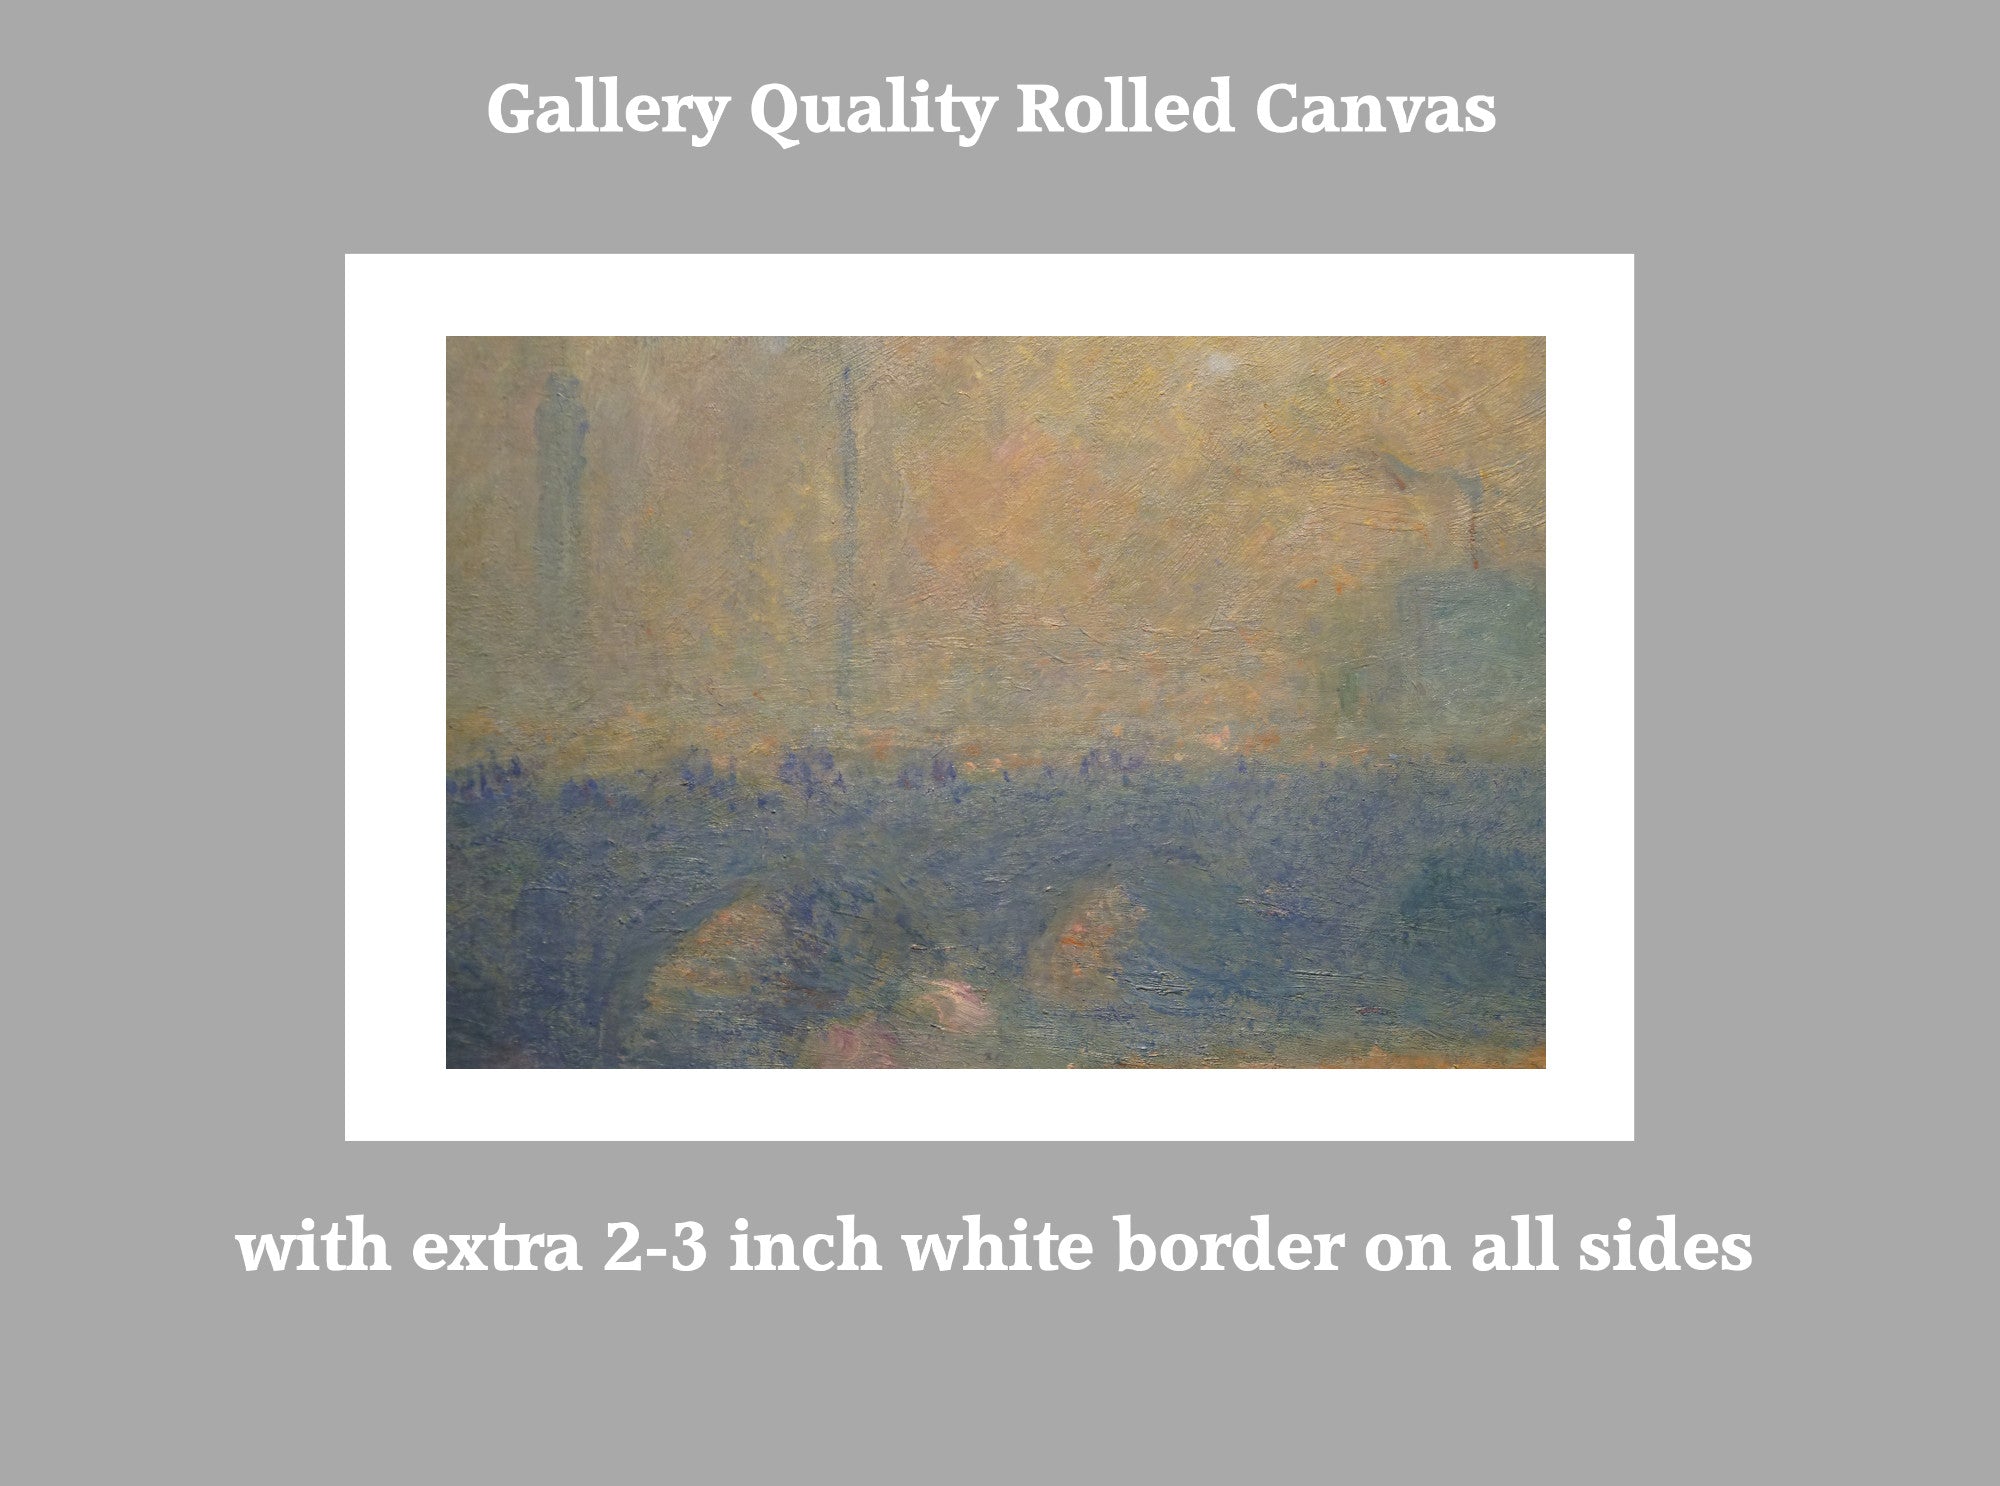 Waterloo Bridge, Sunlight Effect with Smoke, Claude Monet, Gallery Quality Canvas Reproduction